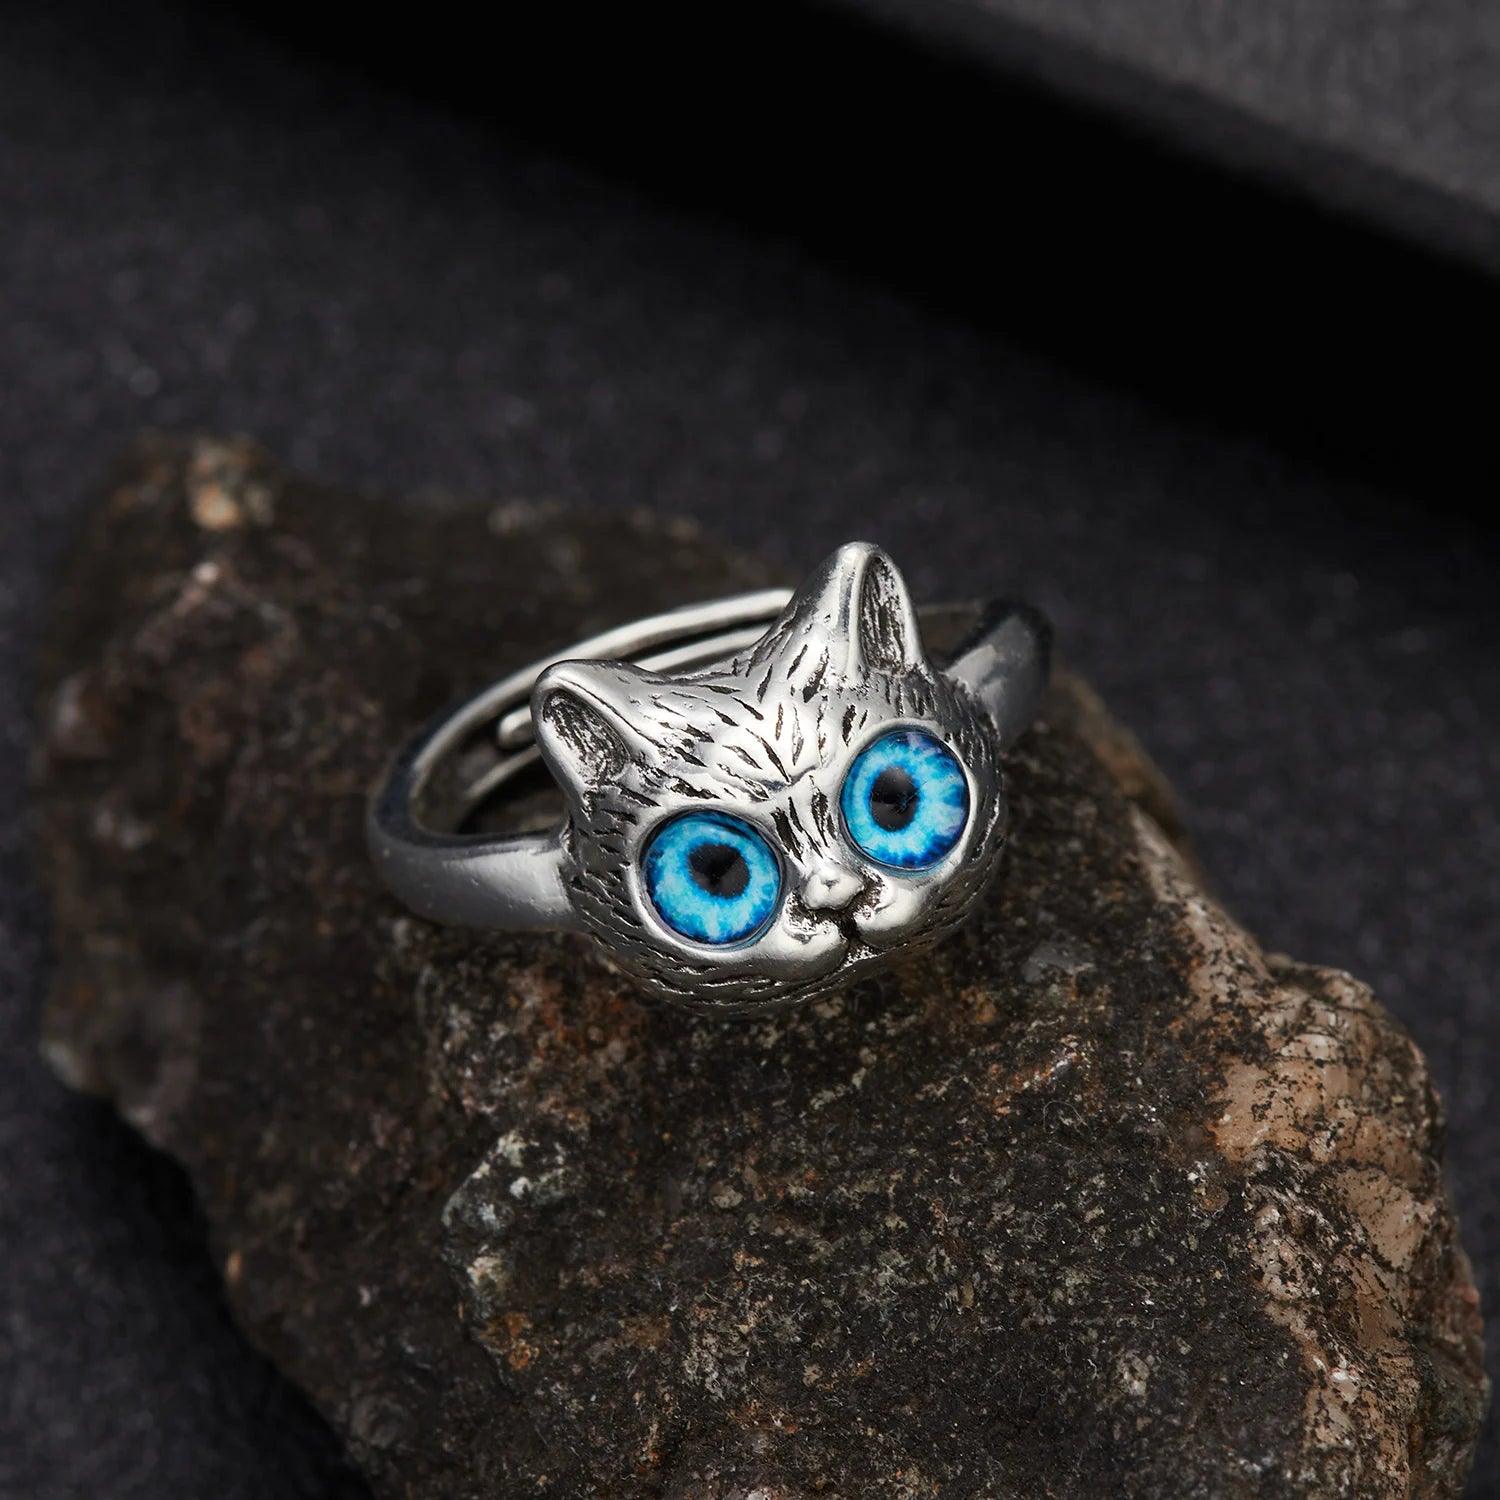 Adorable Big-Eyed Cat Adjustable Ring, 3 Colors - Just Cats - Gifts for Cat Lovers